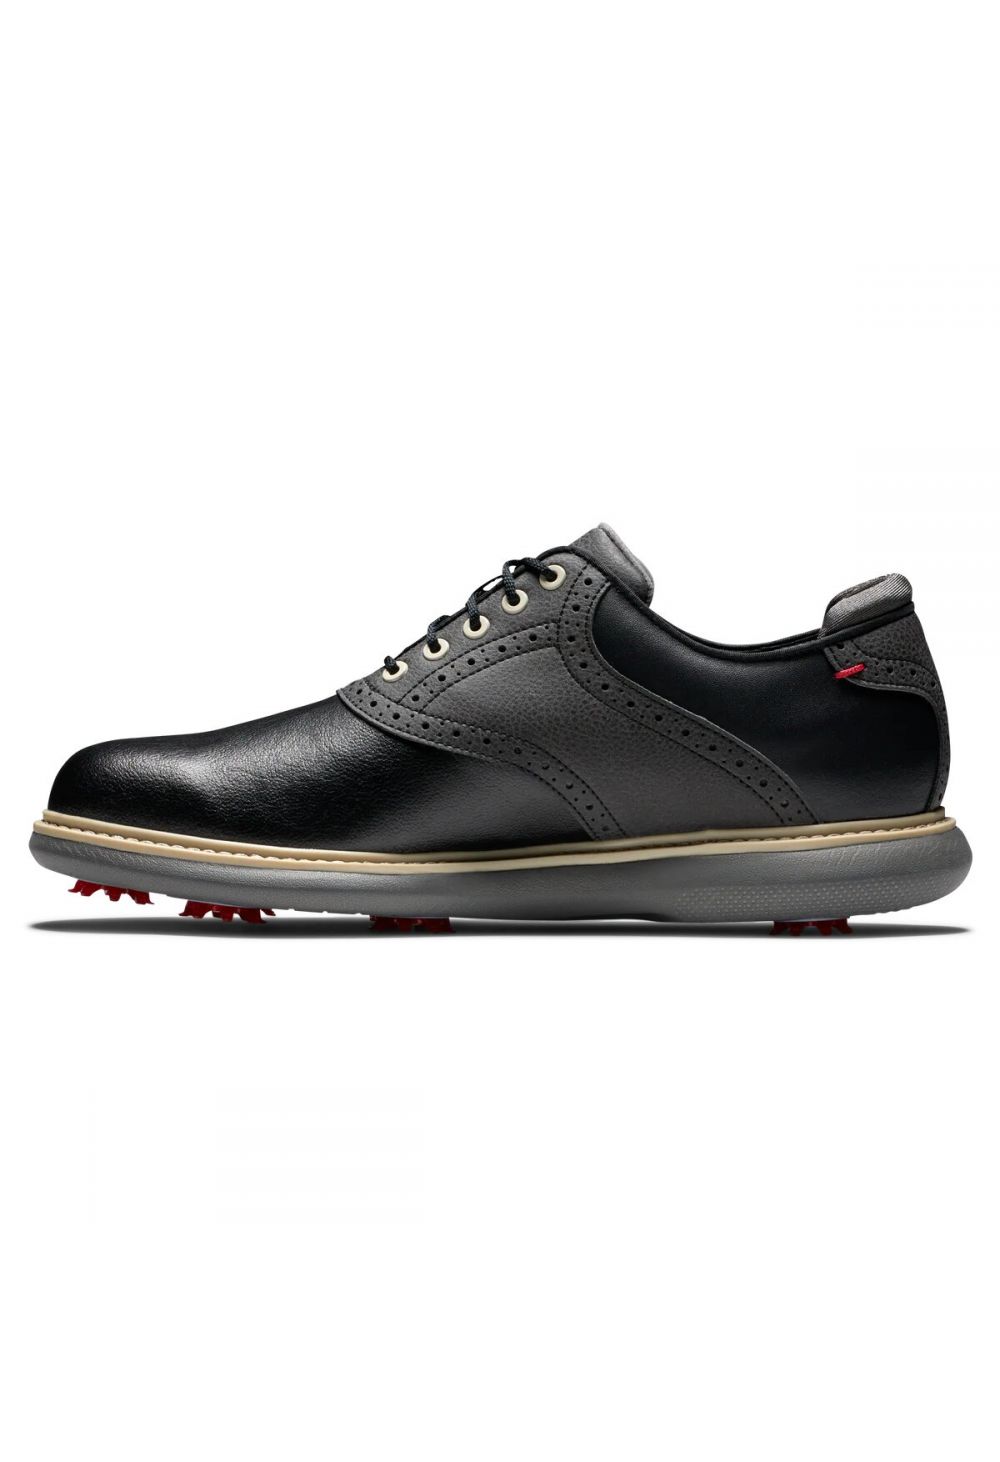 Footjoy Traditions Golf Shoes 57904